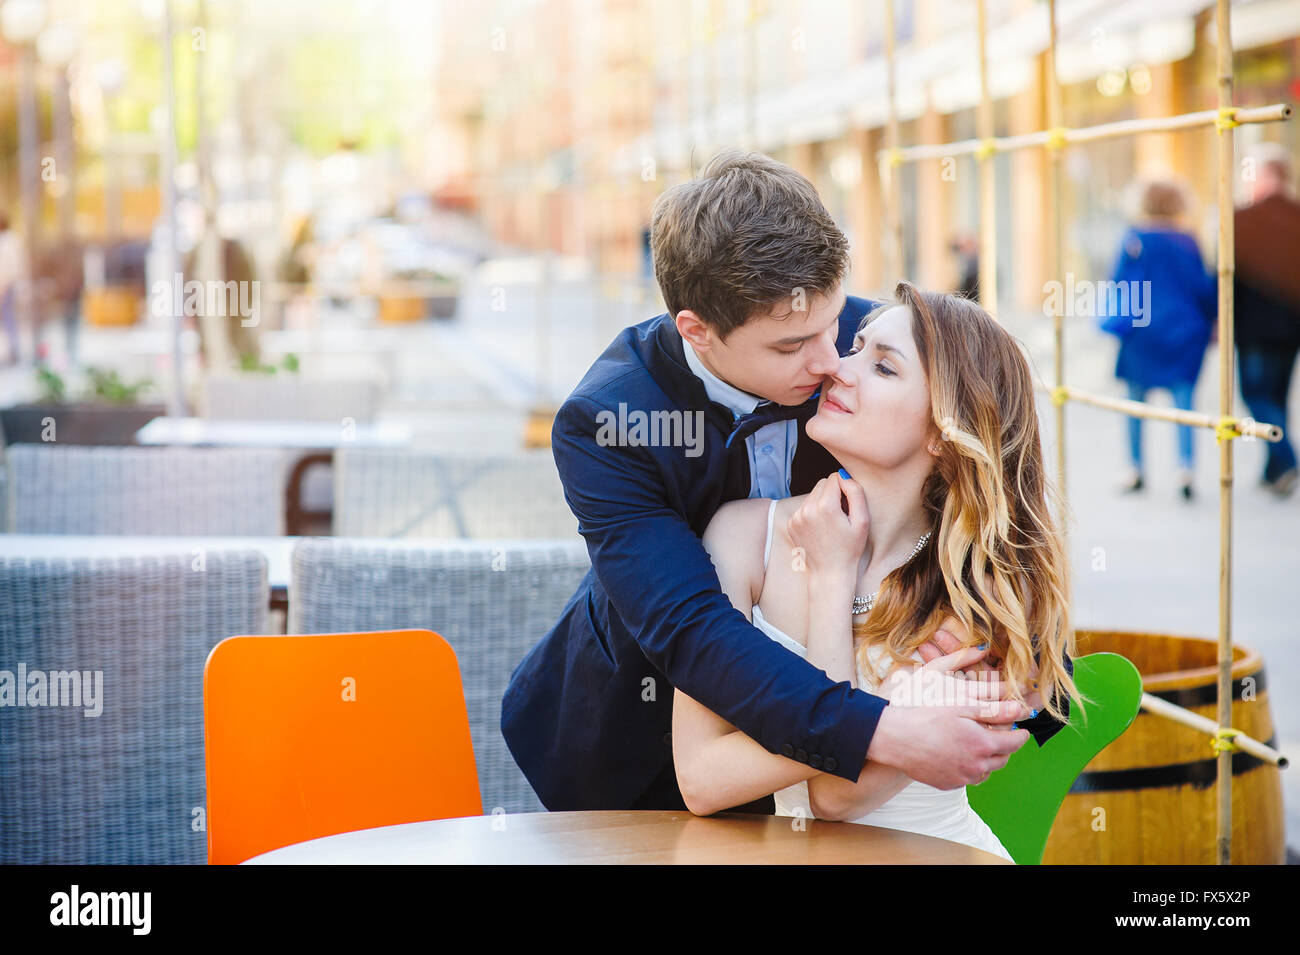 Bride and groom in wedding day kissing Stock Photo